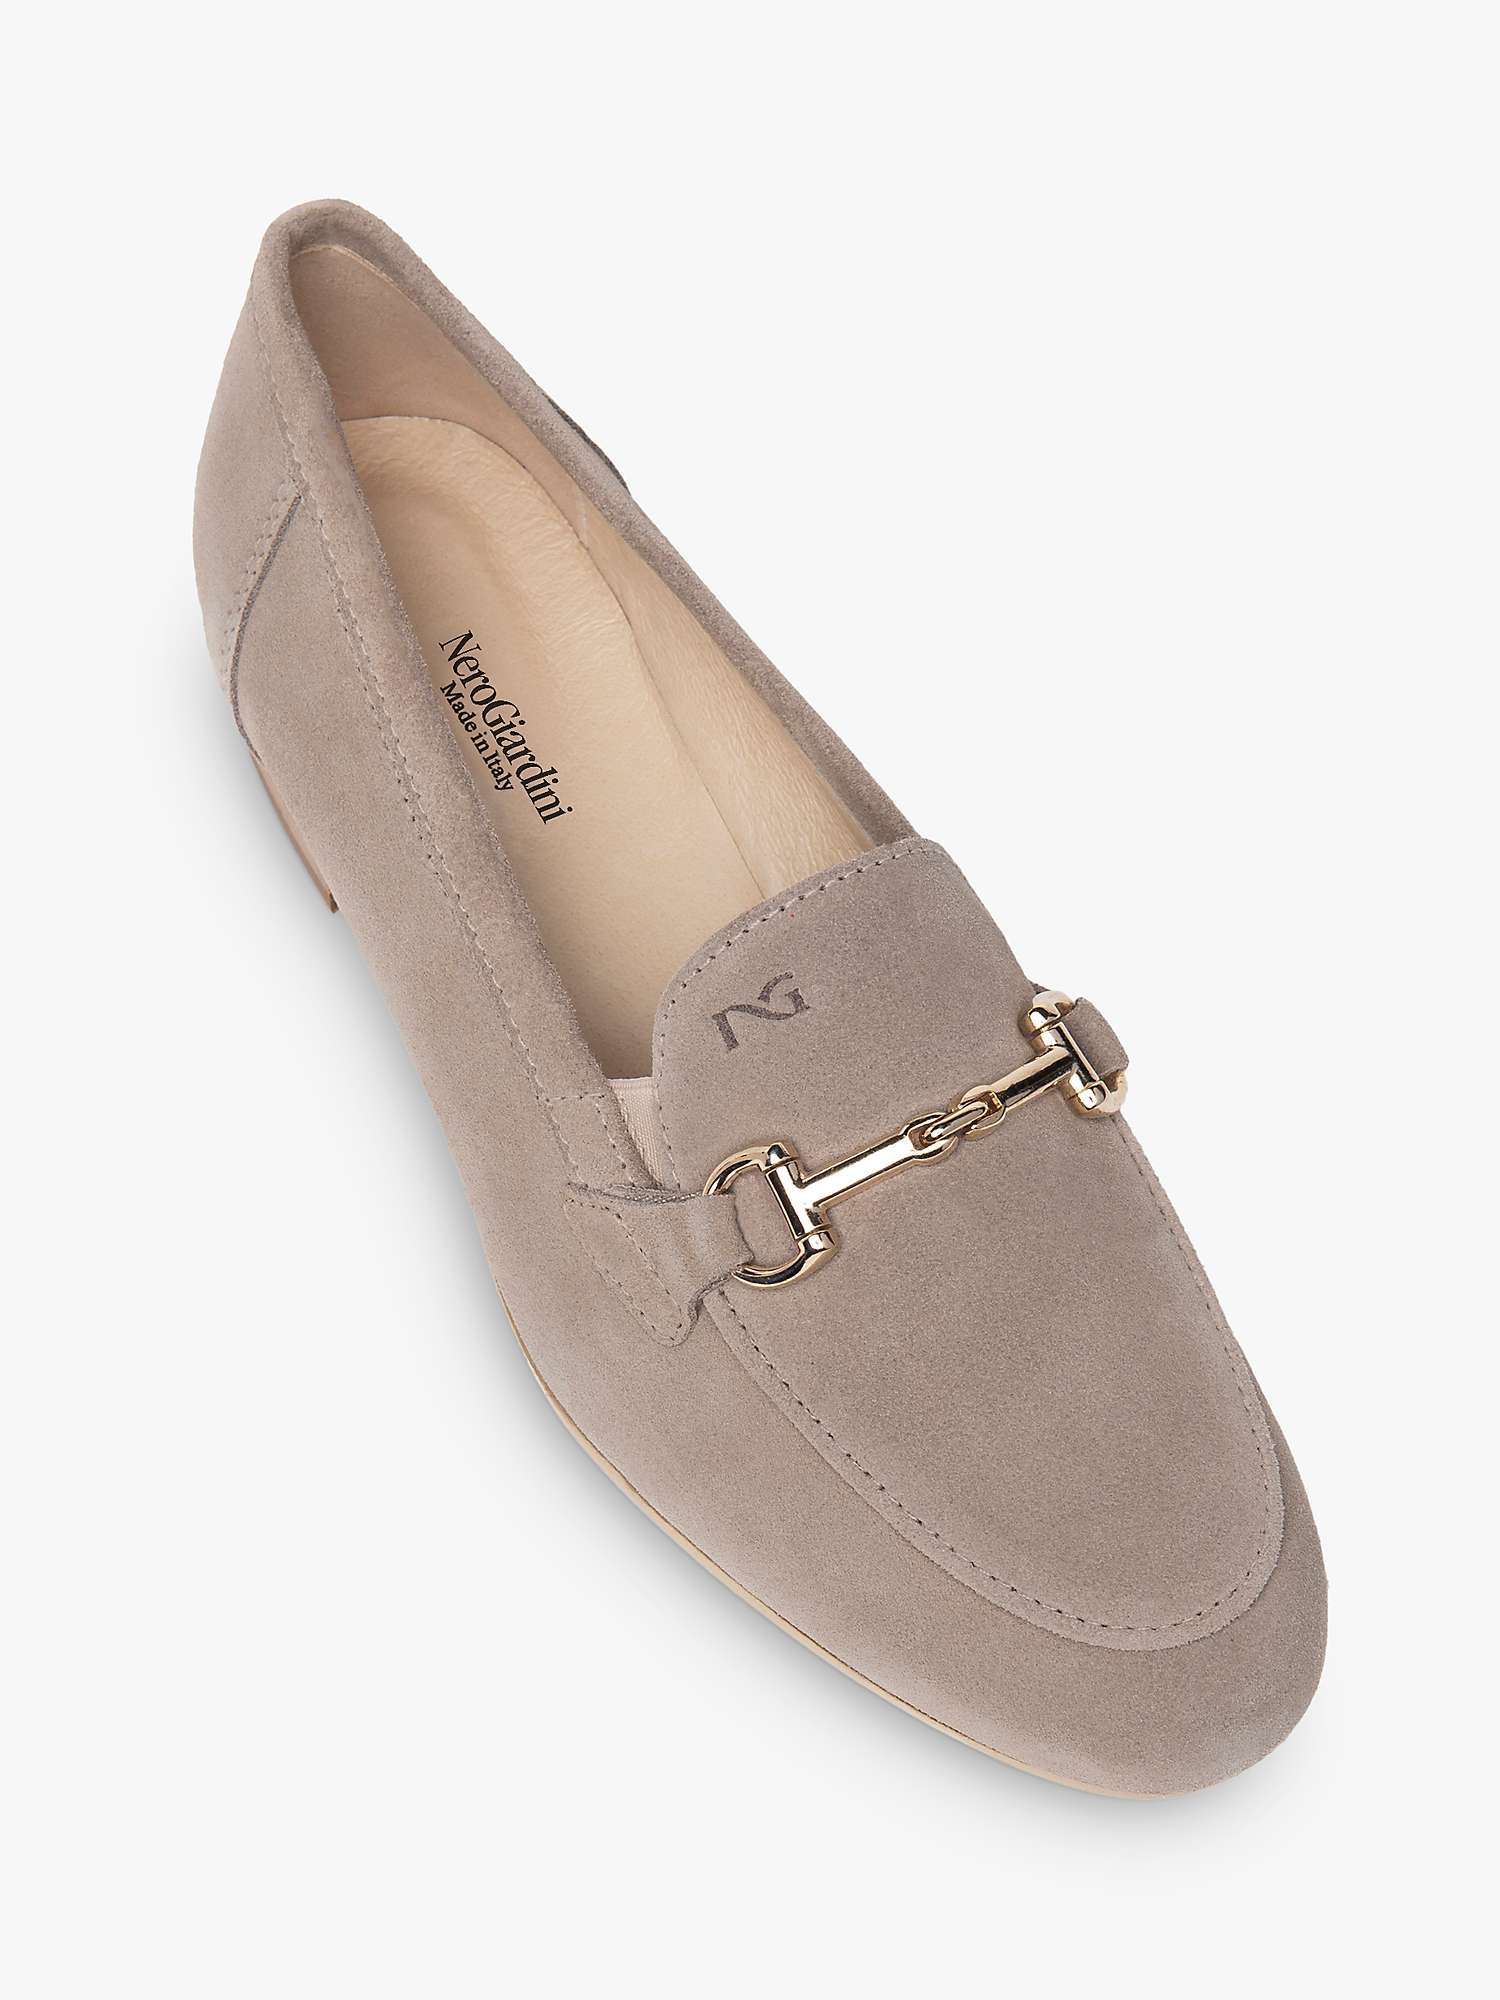 Buy NeroGiardini Snaffle Suede Loafers Online at johnlewis.com